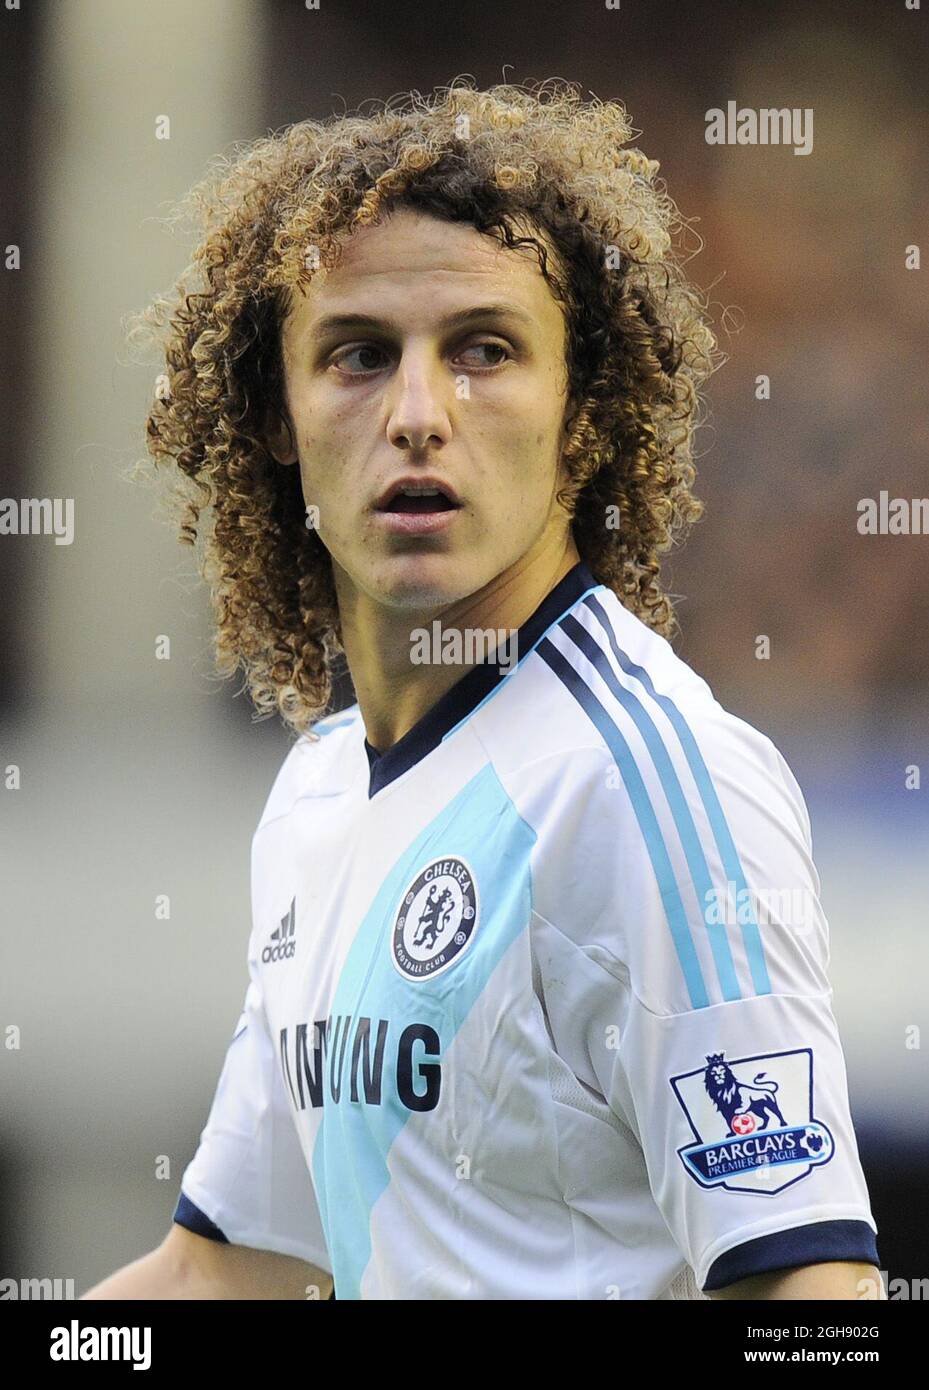 David Luiz of Chelsea during Barclays Premier League soccer match between Everton and Chelsea at the Goodison Park Stadium in Liverpool, United Kingdom on 30th December, 2012. Picture Simon BellisSportimage Stock Photo